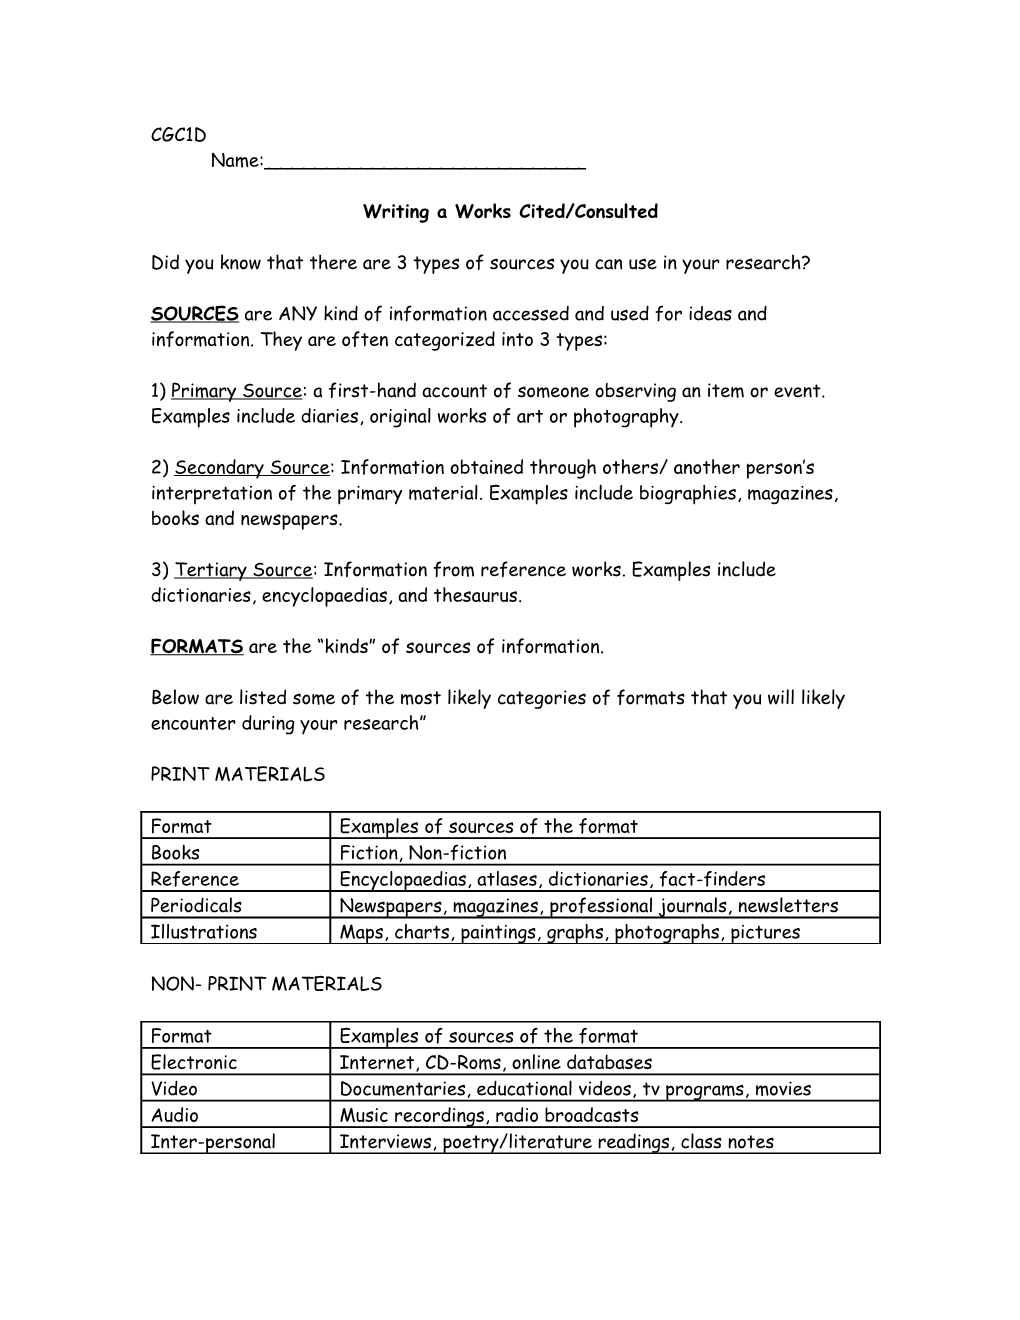 Writing a Works Cited/Consulted